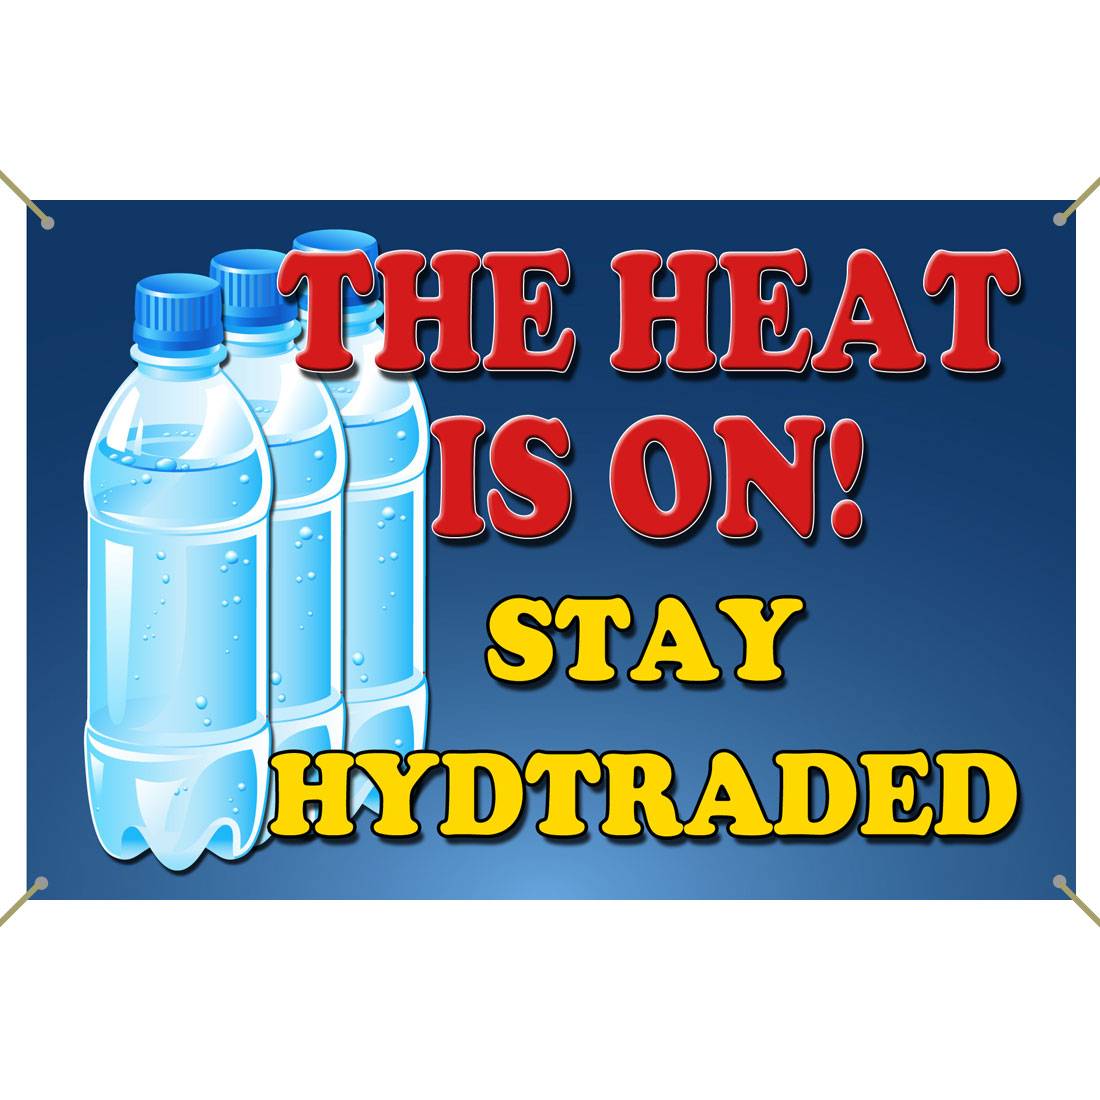 Banners :: Stay Hydrated - Banner